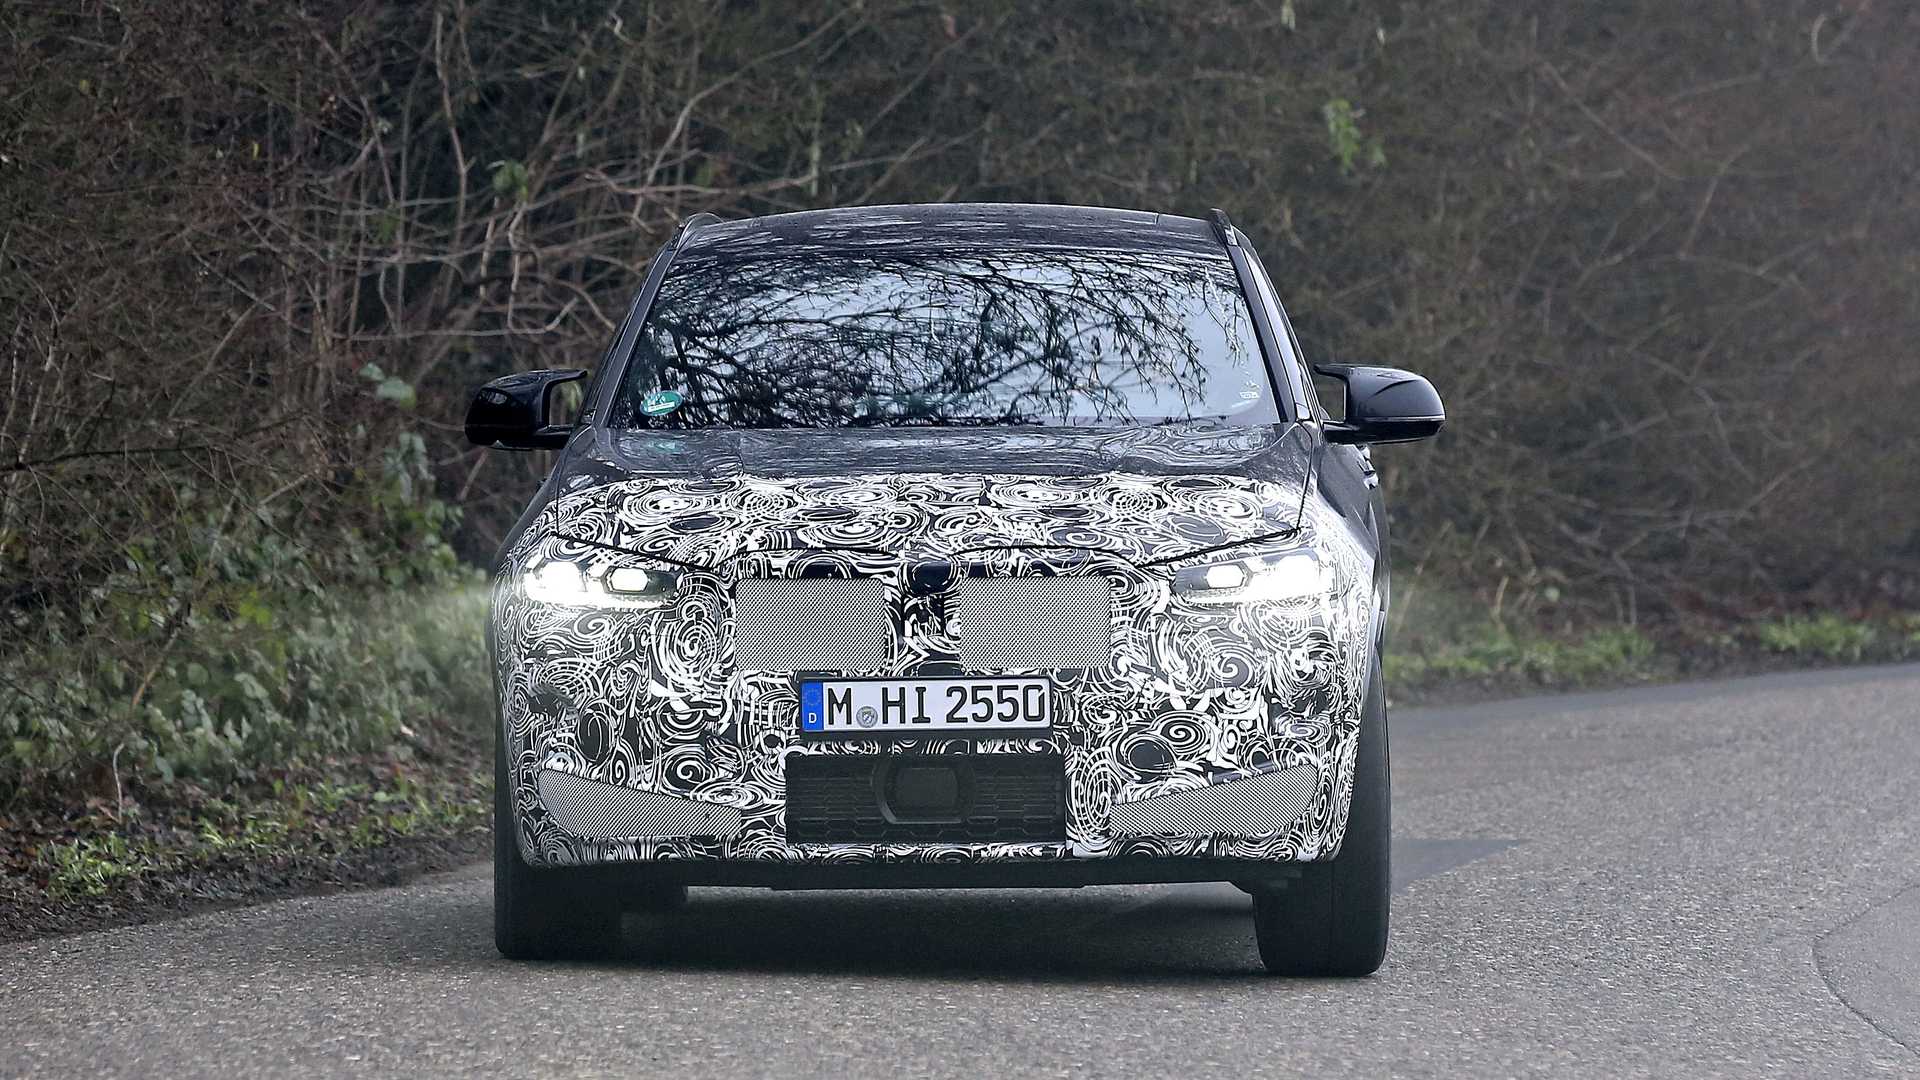 face-lifted-bmw-x4-spied-during-testing (10).jpg